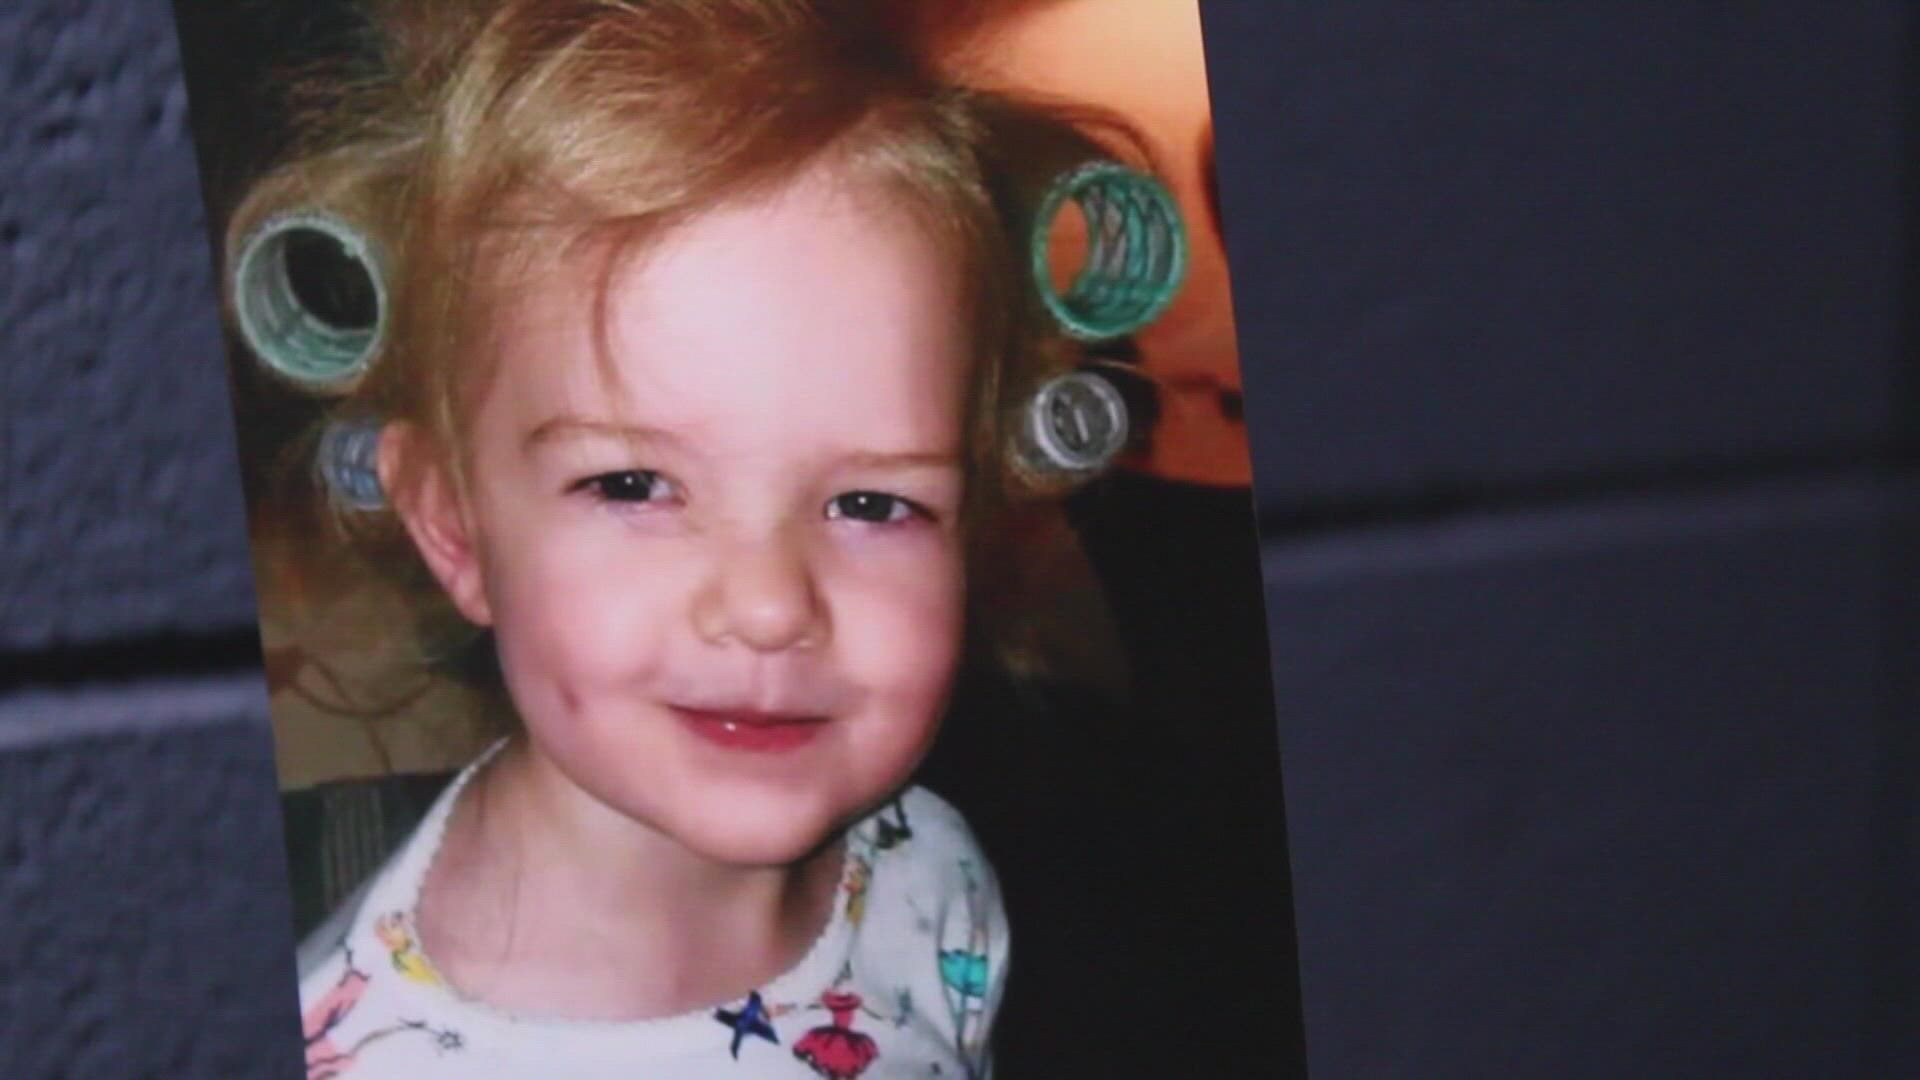 Eight months later, the two suspects charged with Serenity McKinney's murder were back in court today with attorneys to discuss trial details.